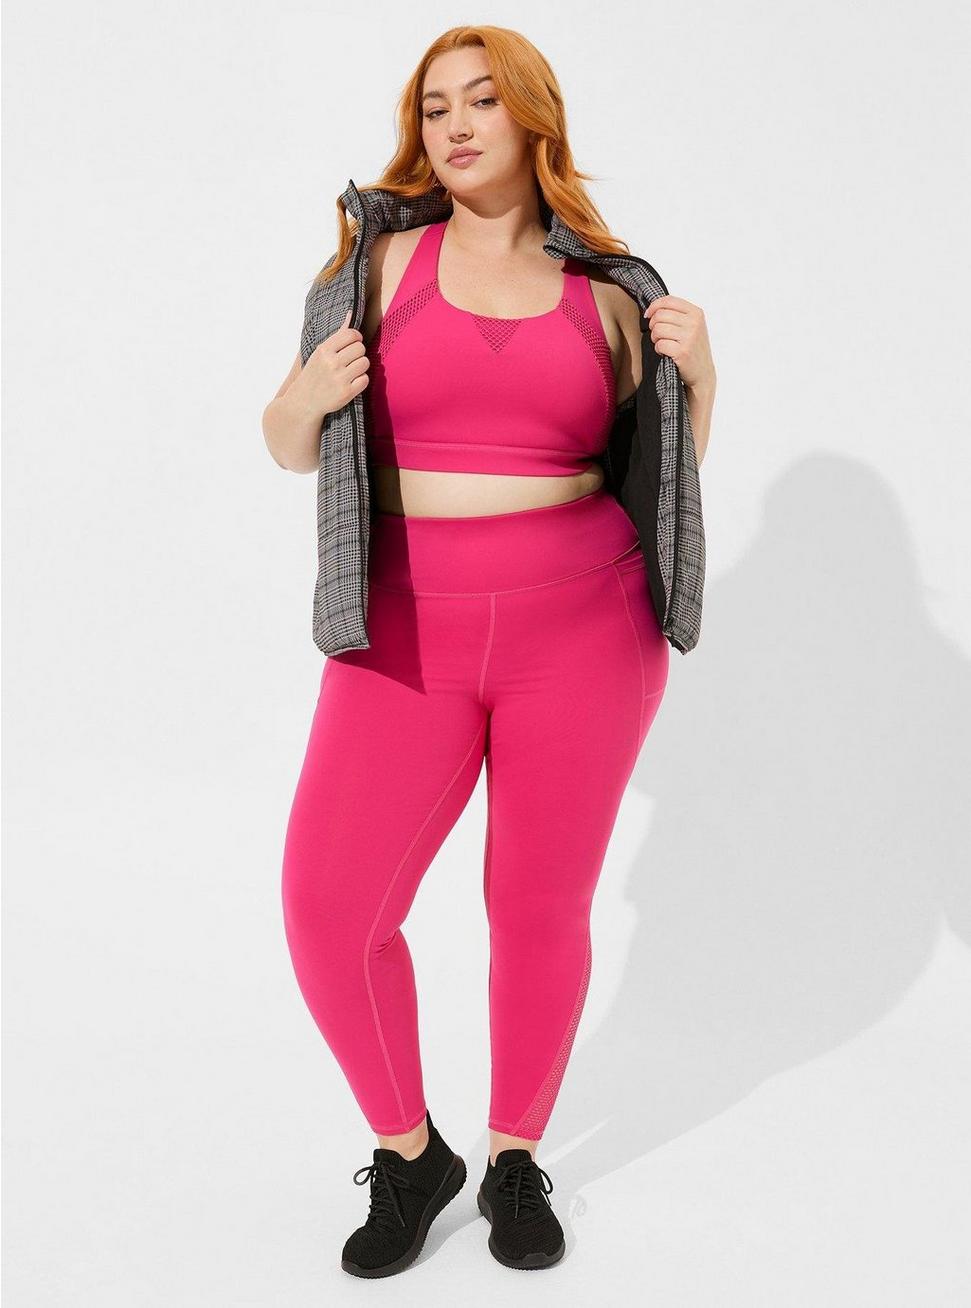 Performance Core Full Length Mesh Active Legging with High Pockets, PINK PEACOCK, alternate